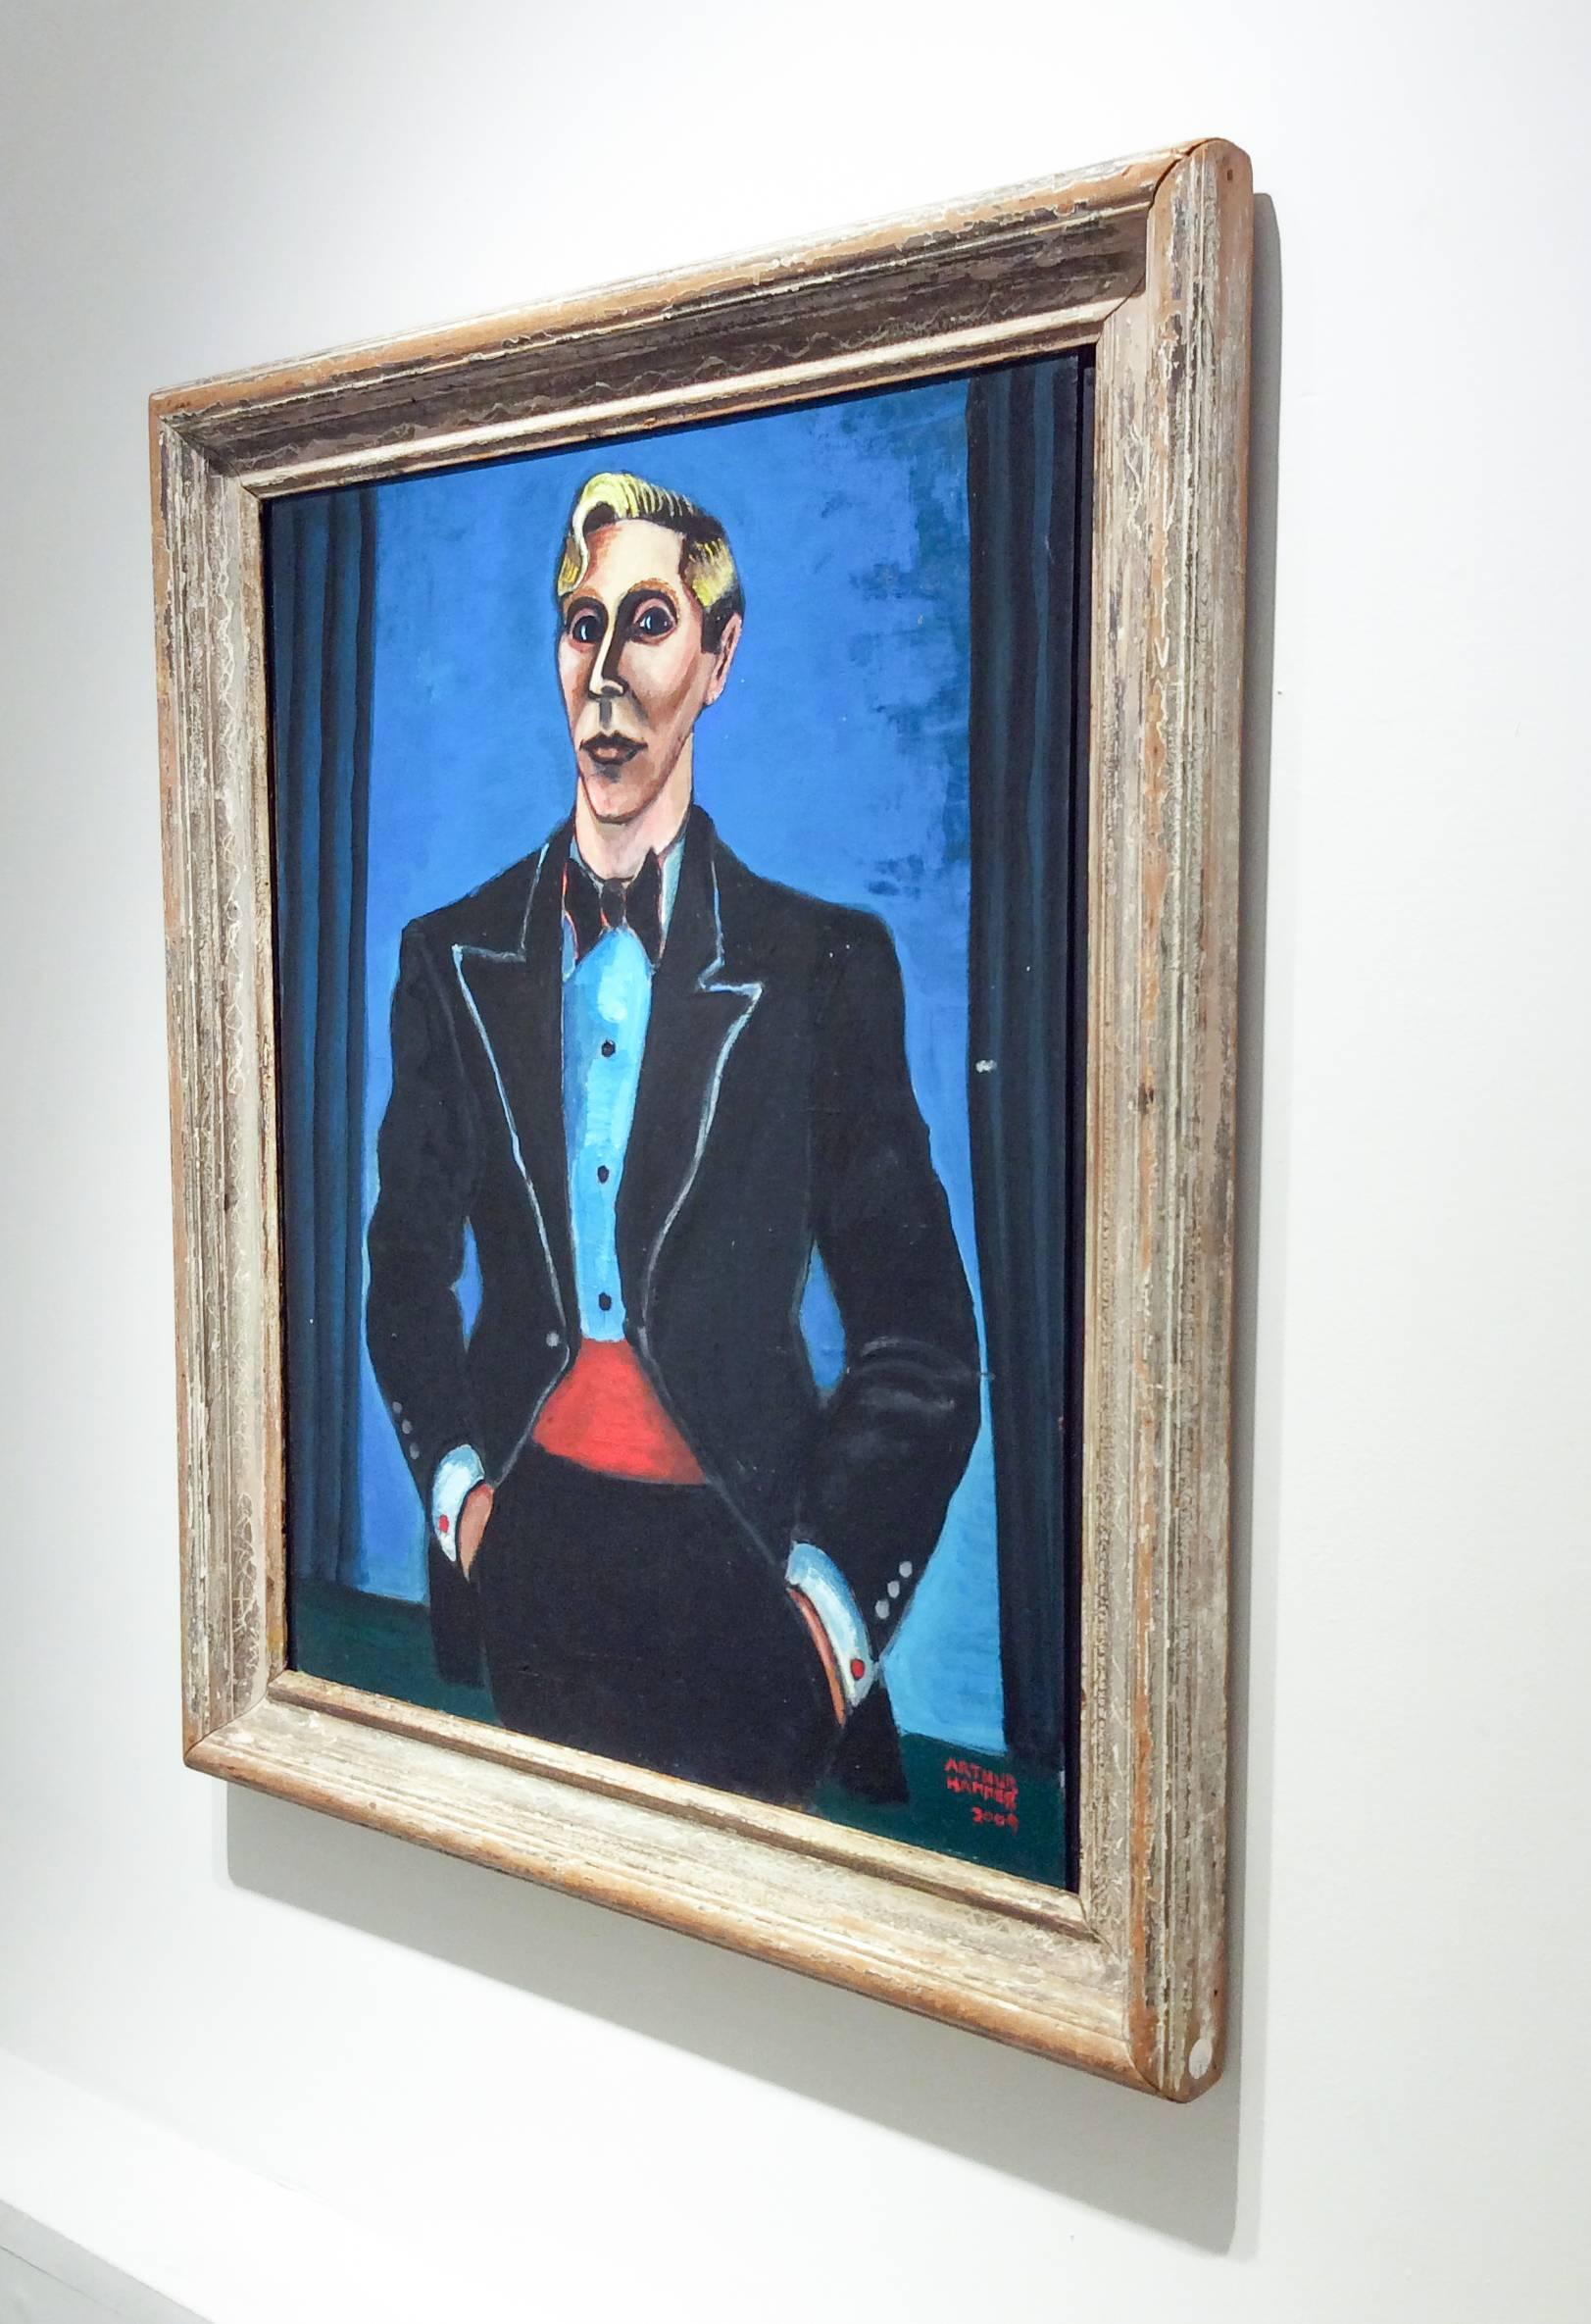 Man In Tuxedo (WPA Style Portrait with Blue Background and Antique Frame) - American Modern Painting by Arthur Hammer